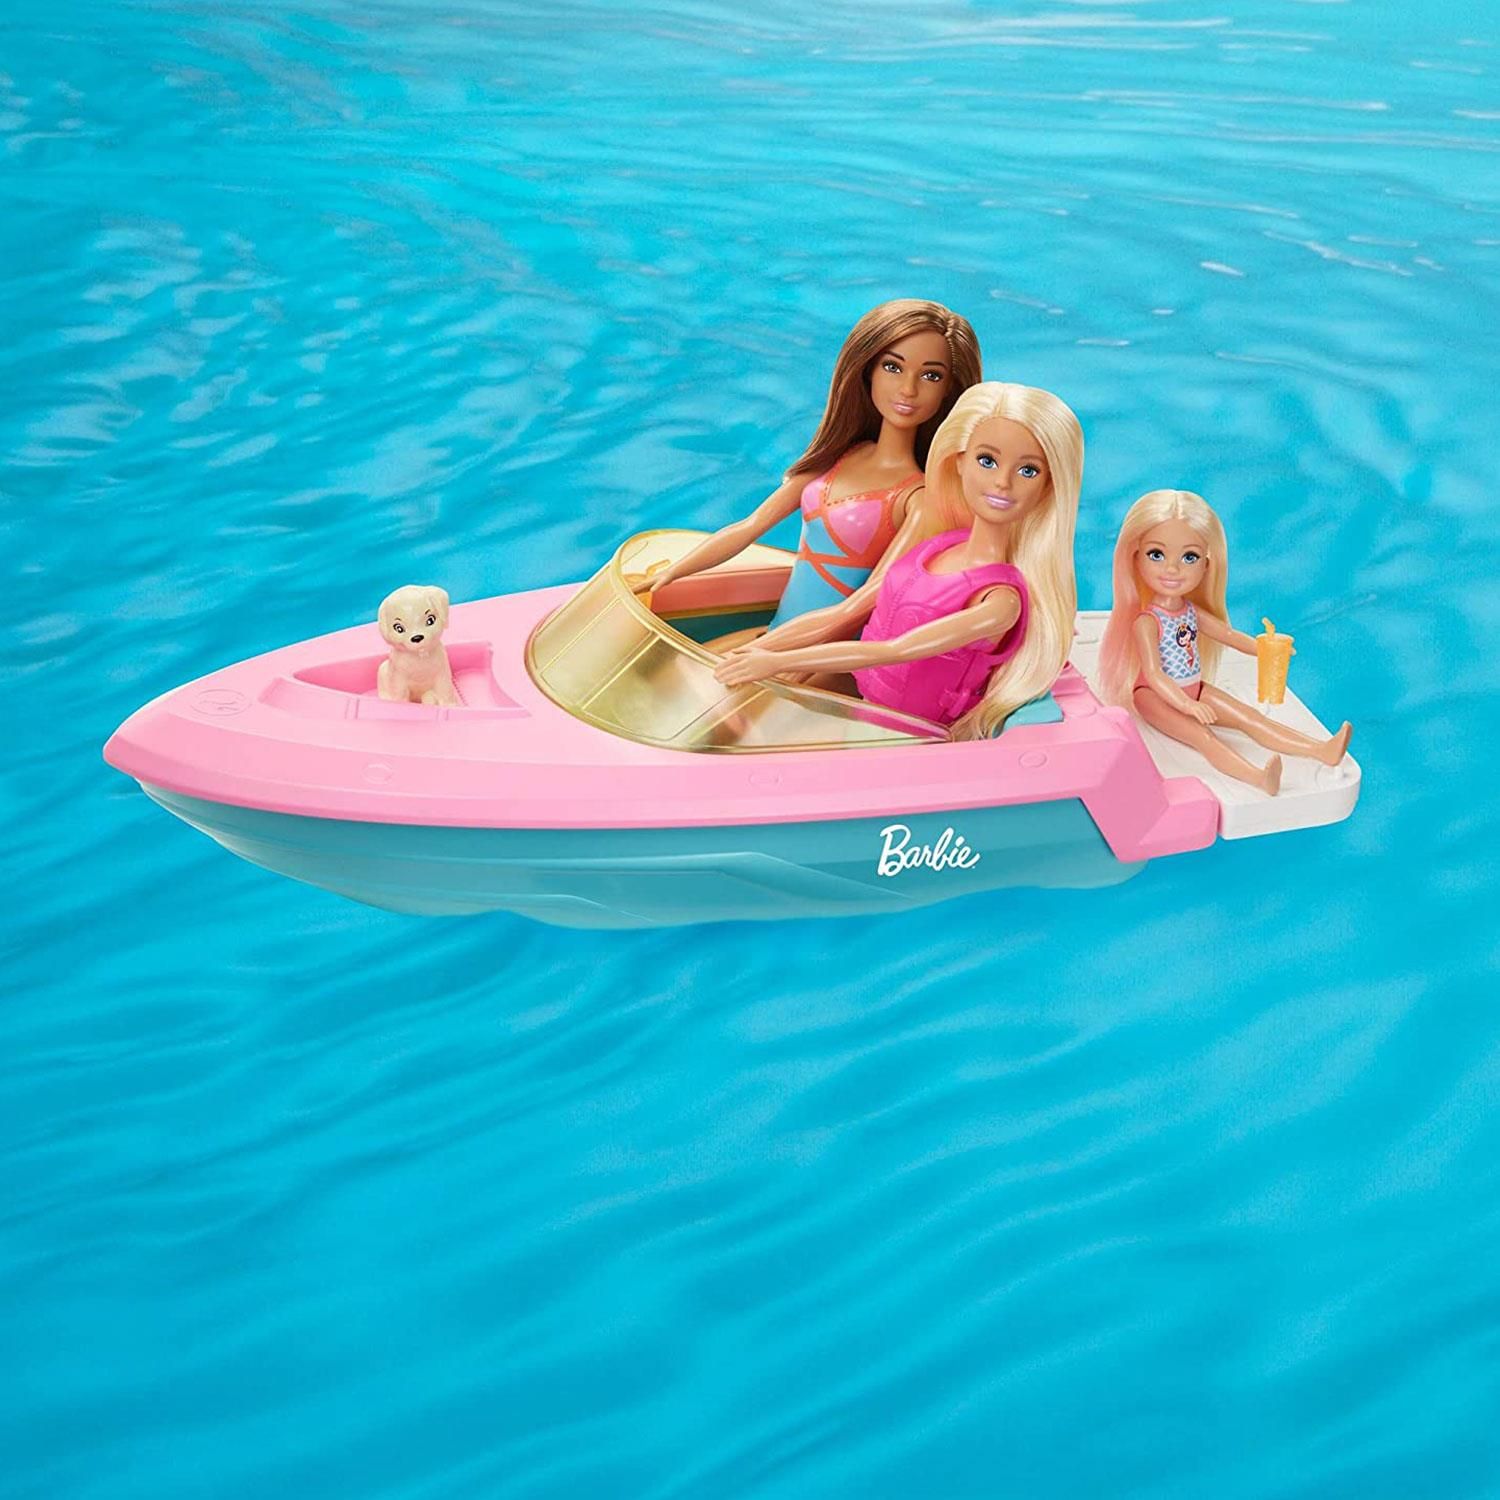 Barbie Boat with Puppy and Accessories, Great Toy Set For Children

Imaginations can take their stories from land to sea with a Barbie boat that really floats! With cool features, a colourful design and room for three dolls (sold separately), kids can load the speed boat up and take their Barbie dolls on all kinds of adventures. Slip a doll into the hot pink life vest and ride through the wake, then park the boat to lounge on the stern with plug-and-play cupholders and beverage accessories. Barbie doll's pet puppy is along for the ride, too -- there's even a special seat on the bow, just for him! A colourful pink and blue design is just a Barbie doll's style, and a translucent yellow weather shield adds another pop of colour. Whether young adventurers take this Barbie boat out on the water or imagine their own ocean of fun, the playtime possibilities are endless because you can be anything with Barbie! Kids can collect more Barbie dolls and accessories to pack the boat full of fun. Each is sold separately, subject to availability. Colours and decorations may vary.

Features:

Inspire travel adventures with a Barbie boat that really floats!
With cool features, a colourful design and room for 3 dolls (sold separately), this pink and blue speedboat spark endless sea-inspired stories.
Barbie doll's pet puppy is along for the ride -- there's even a special seat on the bow, just for him!
Park the boat to lounge on the stern with plug-and-play cupholders and beverage accessories!
Whether young adventurers take this Barbie boat out on the water or imagine their own ocean of fun, the playtime possibilities are endless because you can be anything with Barbie!

Specifications: 

Toy Form: Barbie Boat 
Age Range: 3 Years & Above
Material: Abs Plastic
Colour: Blue & Black

Package Includes: Barbie Boat with Puppy and Accessories